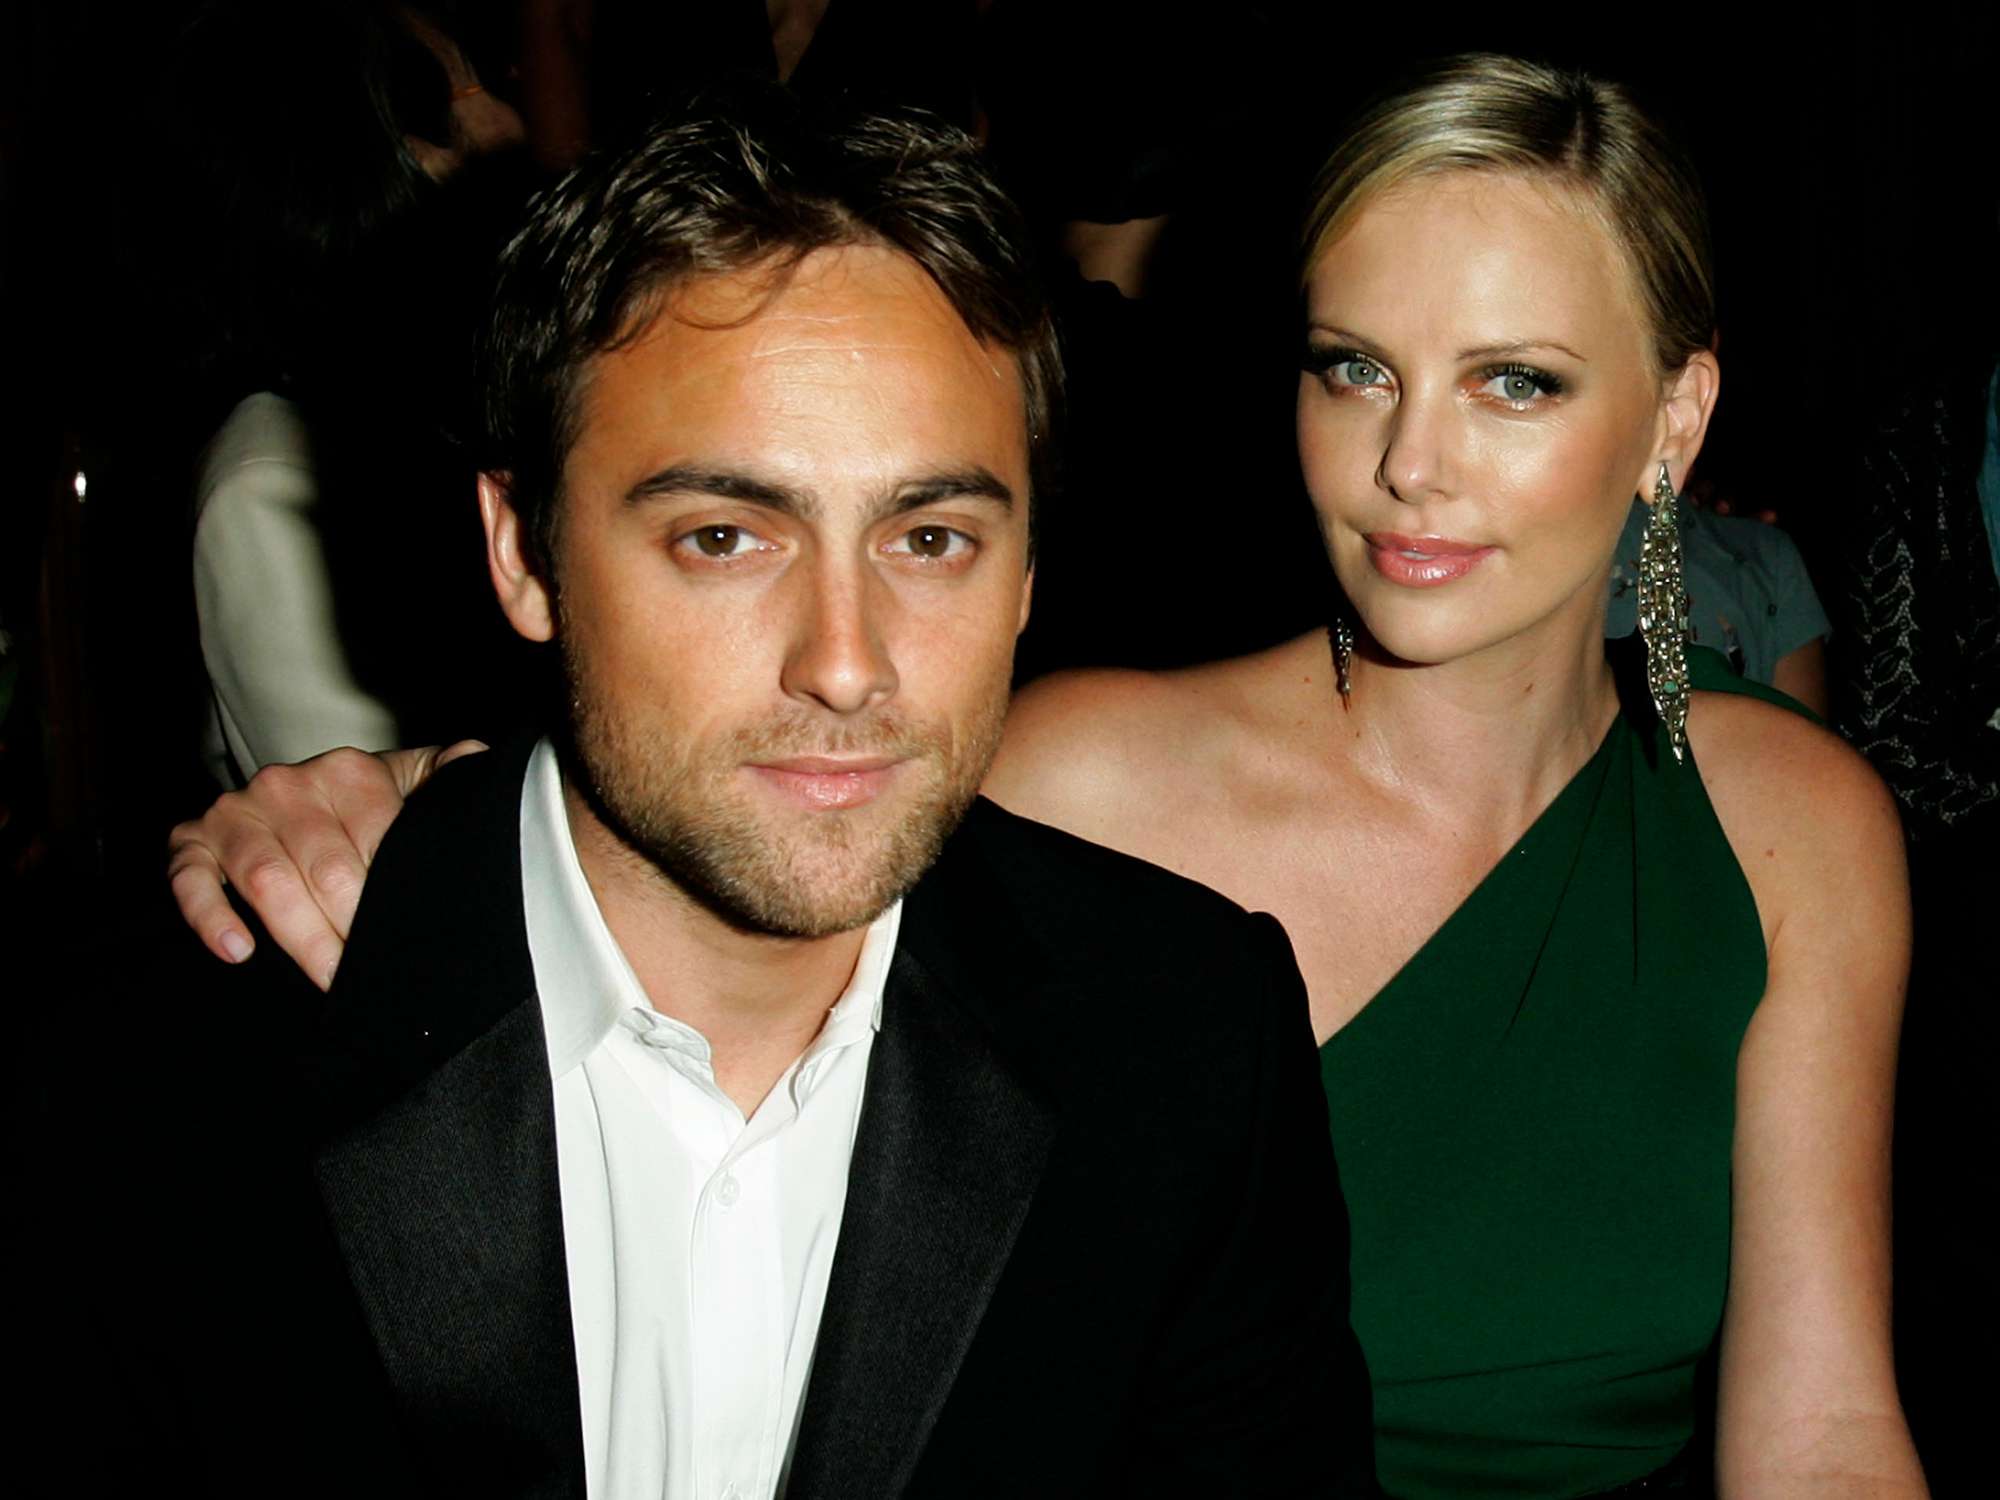 Stuart Townsend and Charlize Theron during Gucci Spring 2006 Fashion Show to Benefit Children's Action Network and Westside Children's Center - Inside at Private Residence in Beverly Hills, California, United States